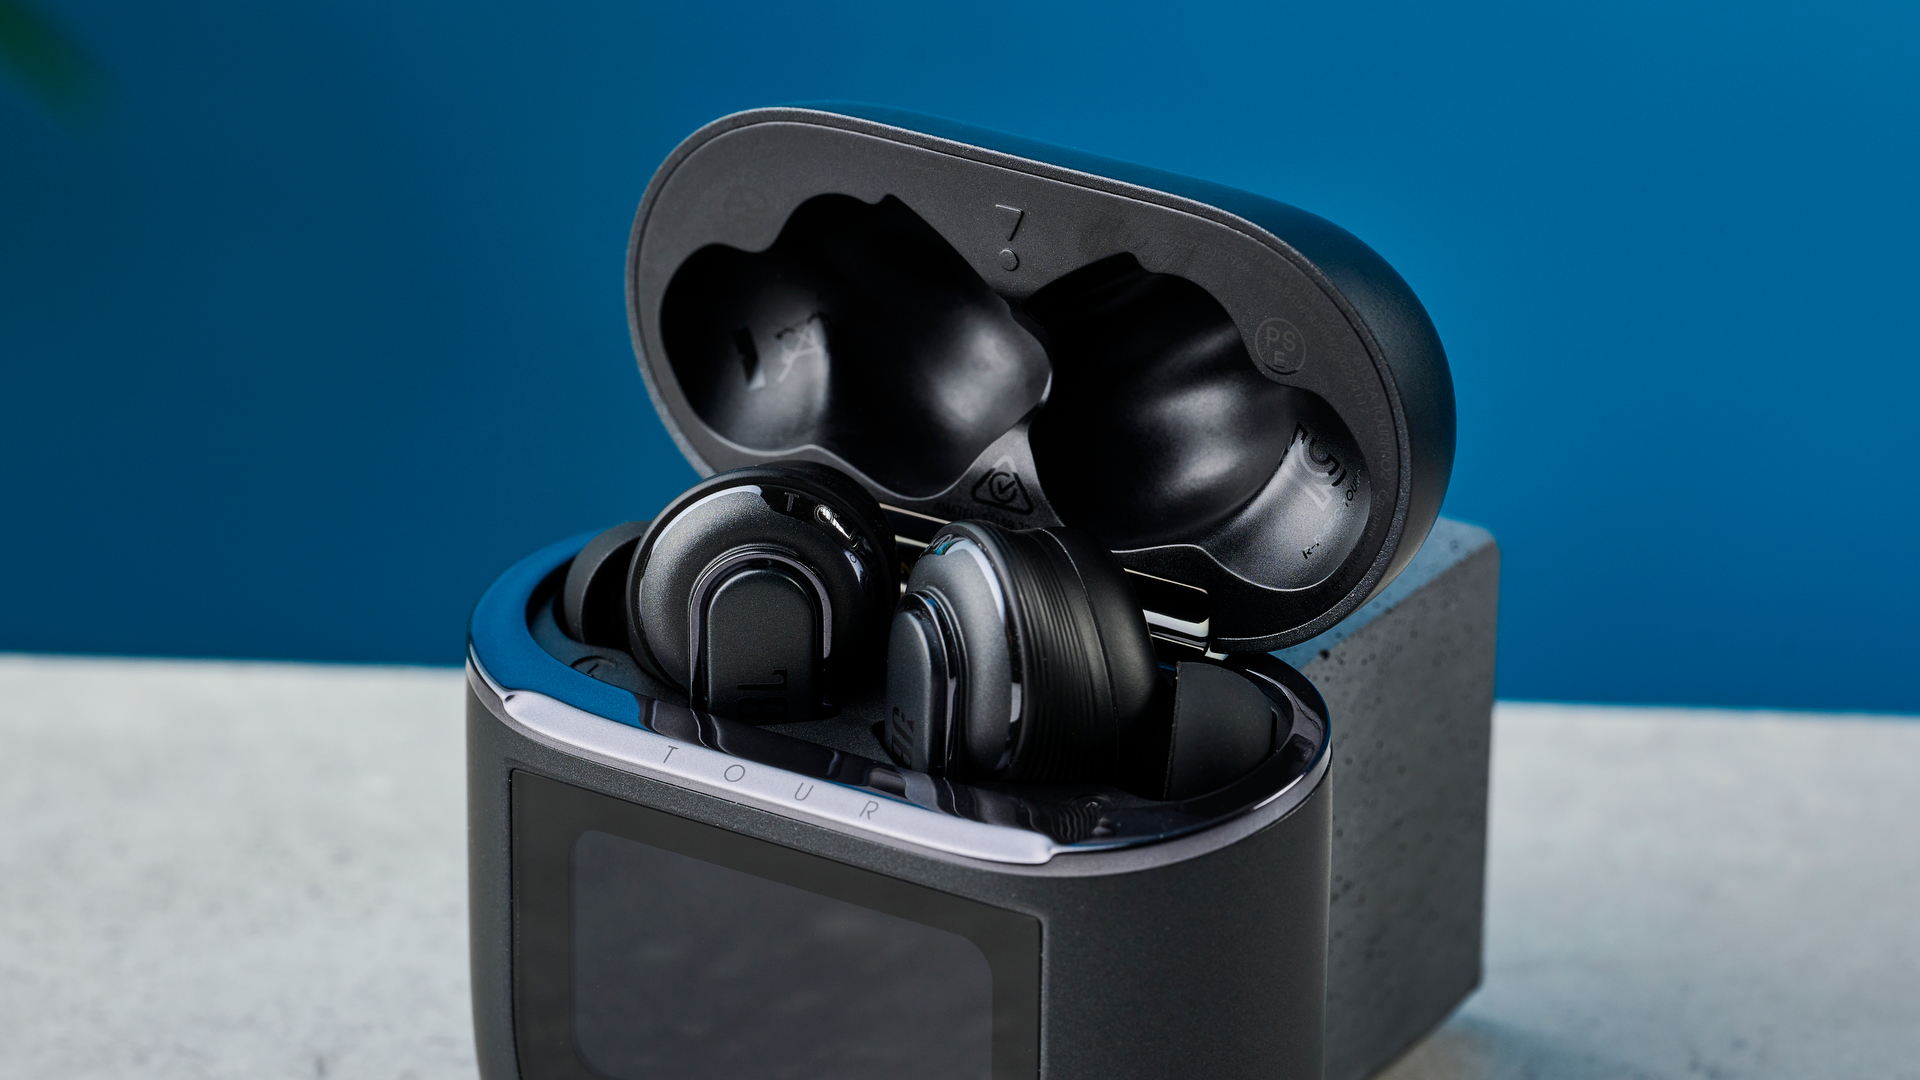 A pair of JBL Tour Pro 2 wireless earbuds in black